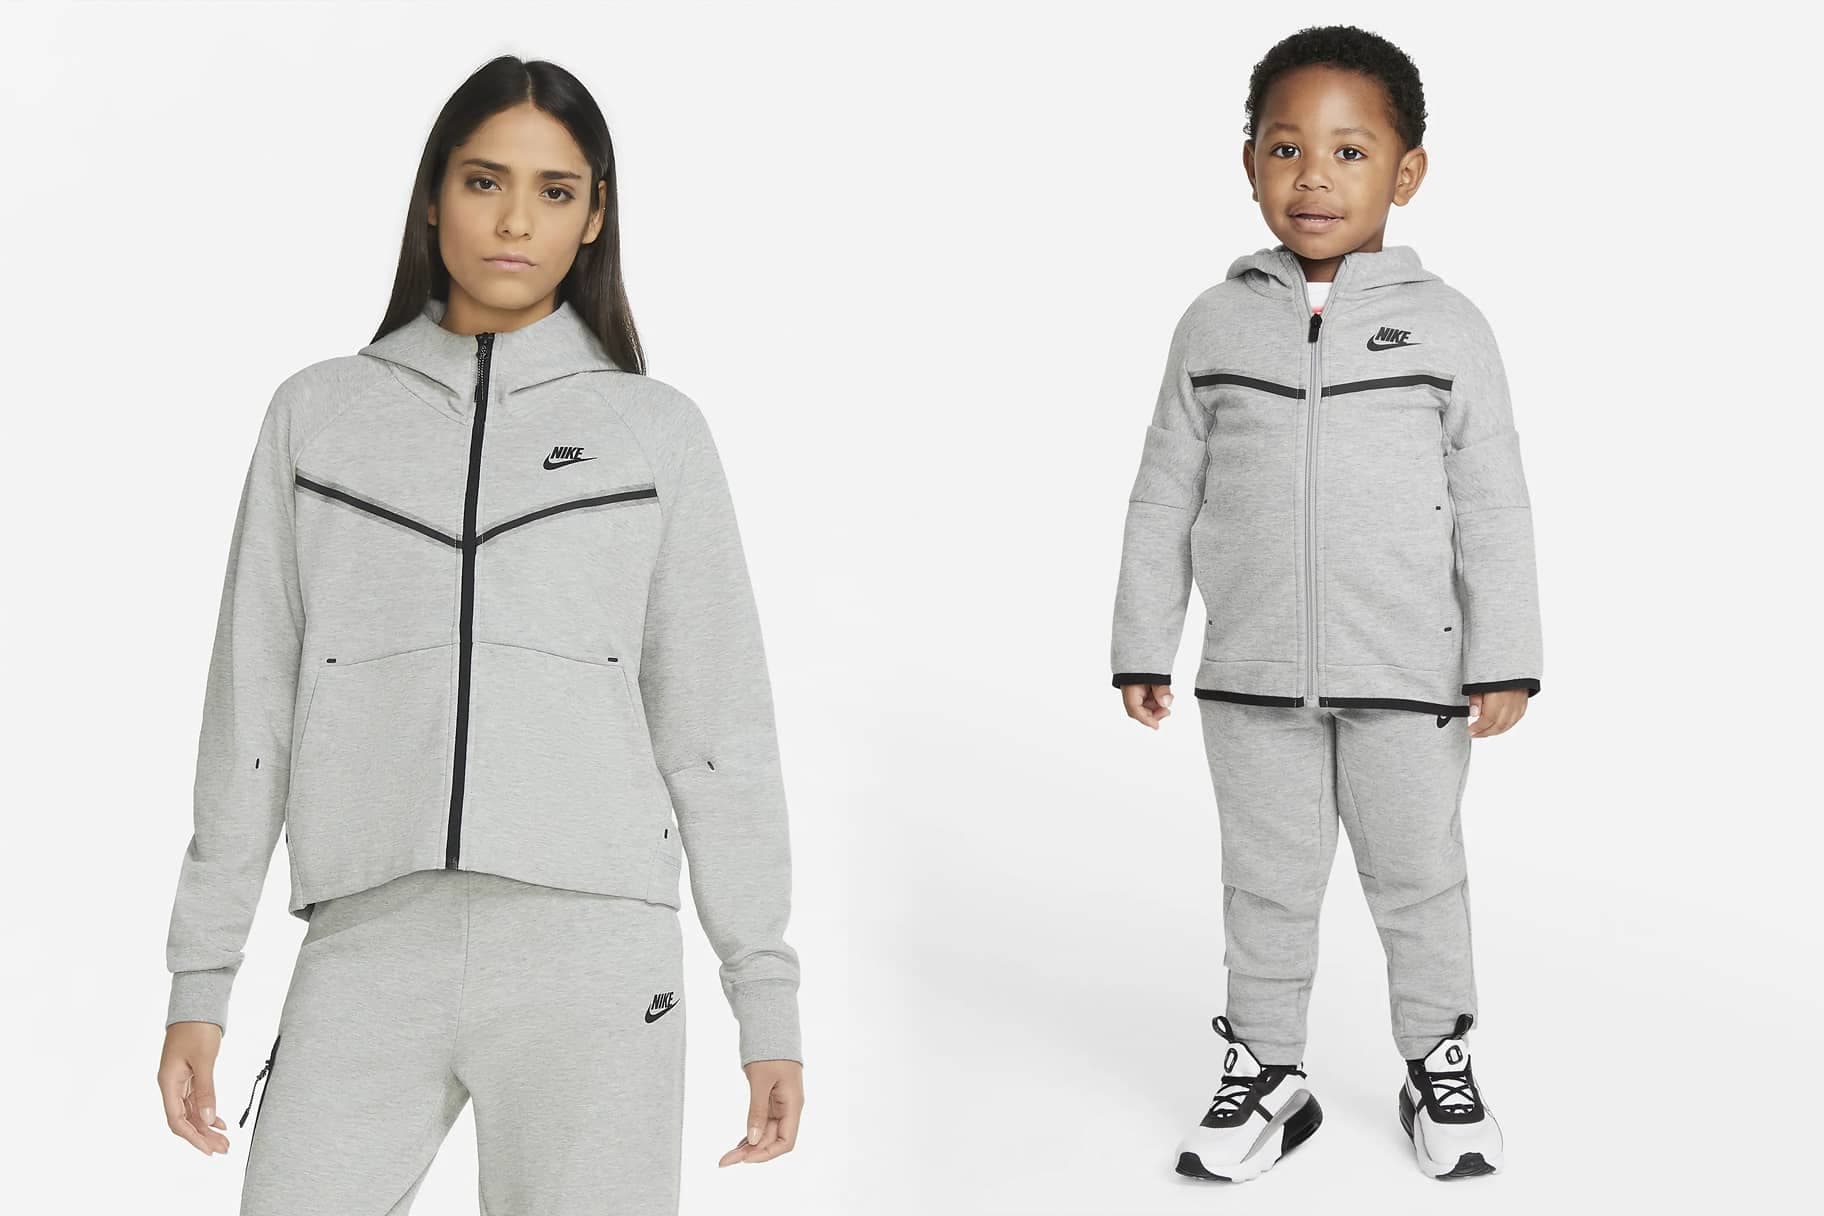 Shop Matching Nike Outfits for the 